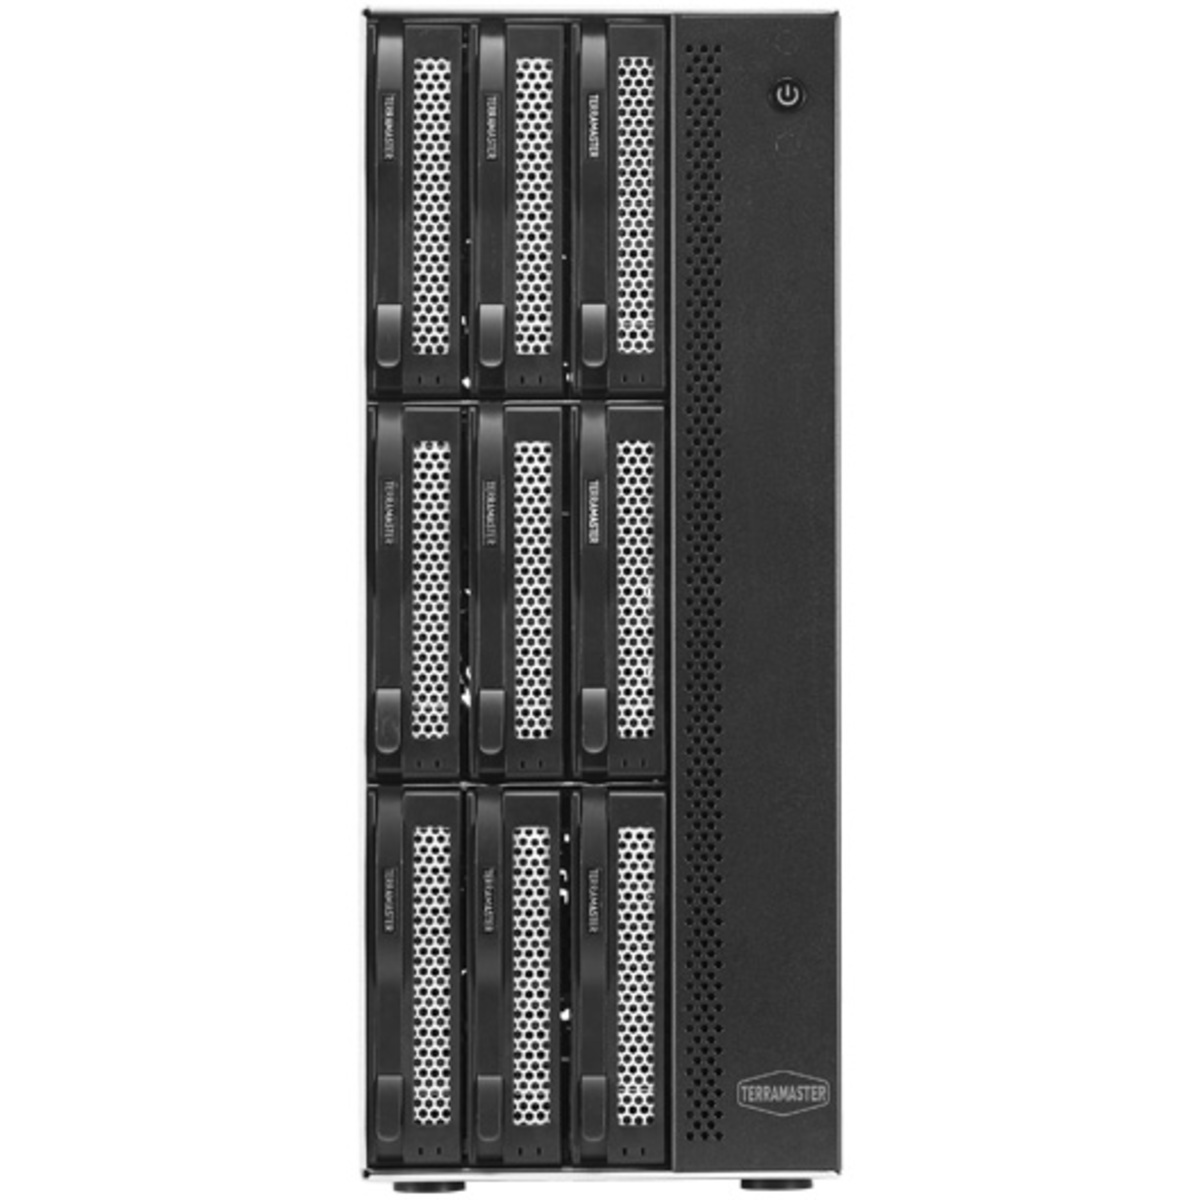 TerraMaster T9-450 80tb 9-Bay Desktop Multimedia / Power User / Business NAS - Network Attached Storage Device 5x16tb Western Digital Red Pro WD161KFGX 3.5 7200rpm SATA 6Gb/s HDD NAS Class Drives Installed - Burn-In Tested T9-450